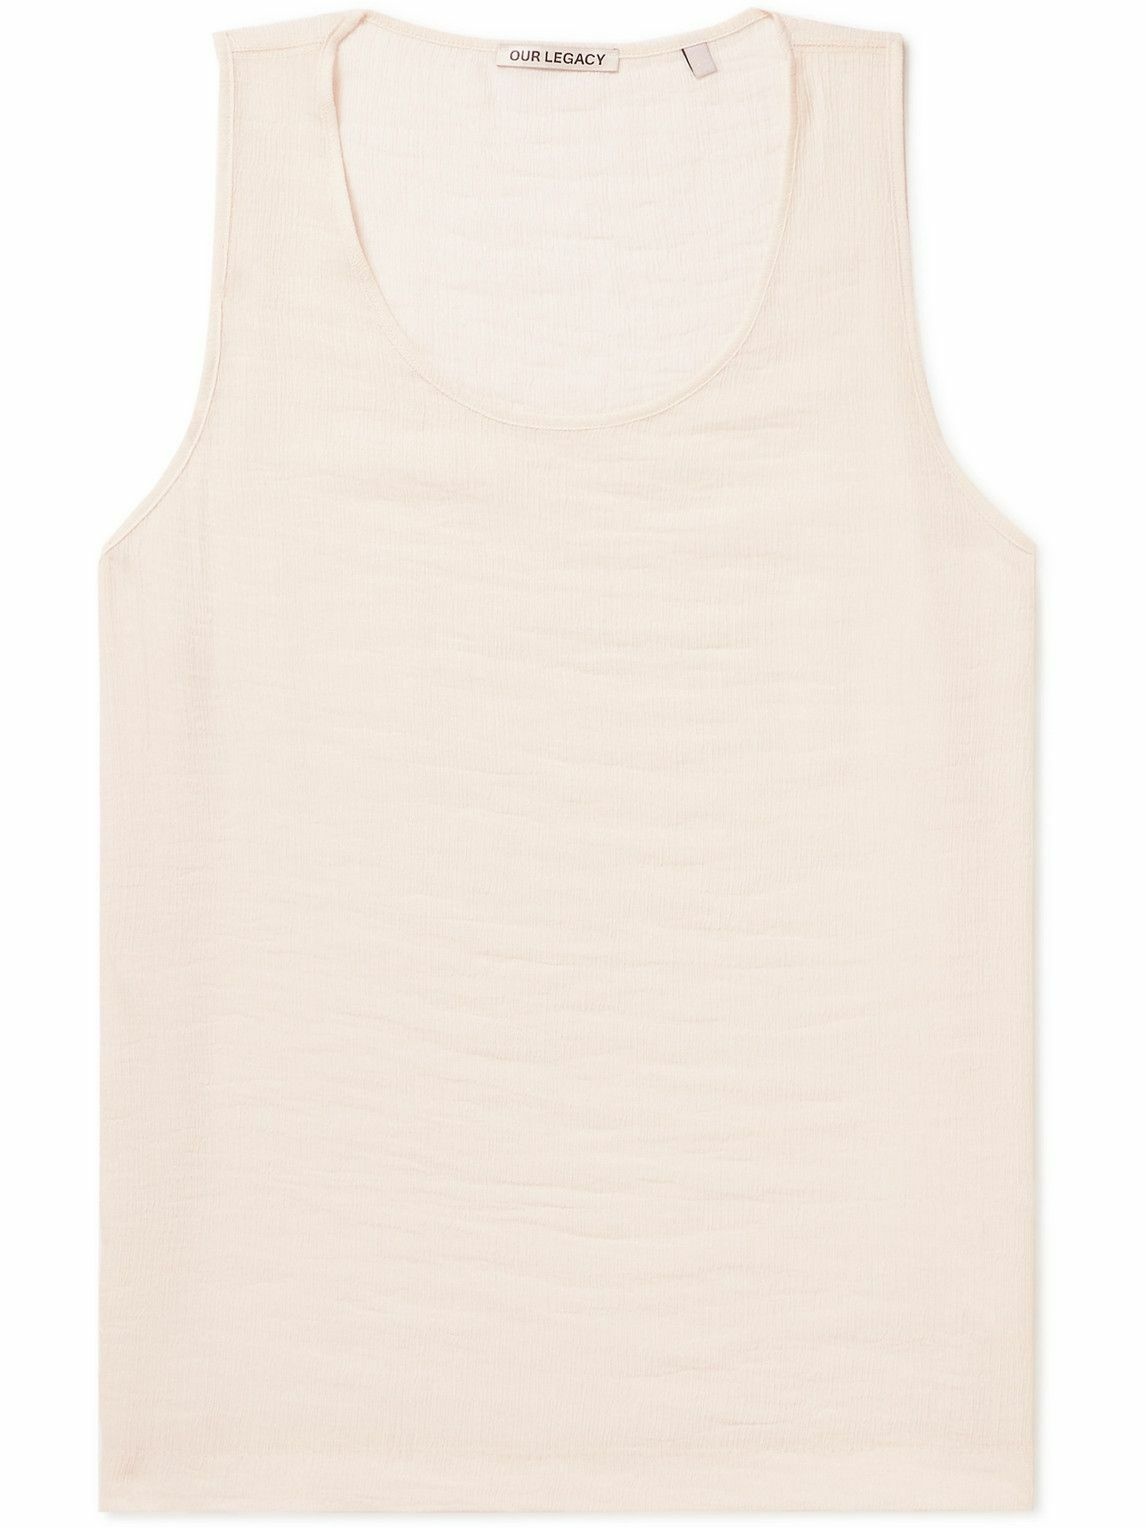 Photo: Our Legacy - Crinkled-Crepe Tank Top - Neutrals